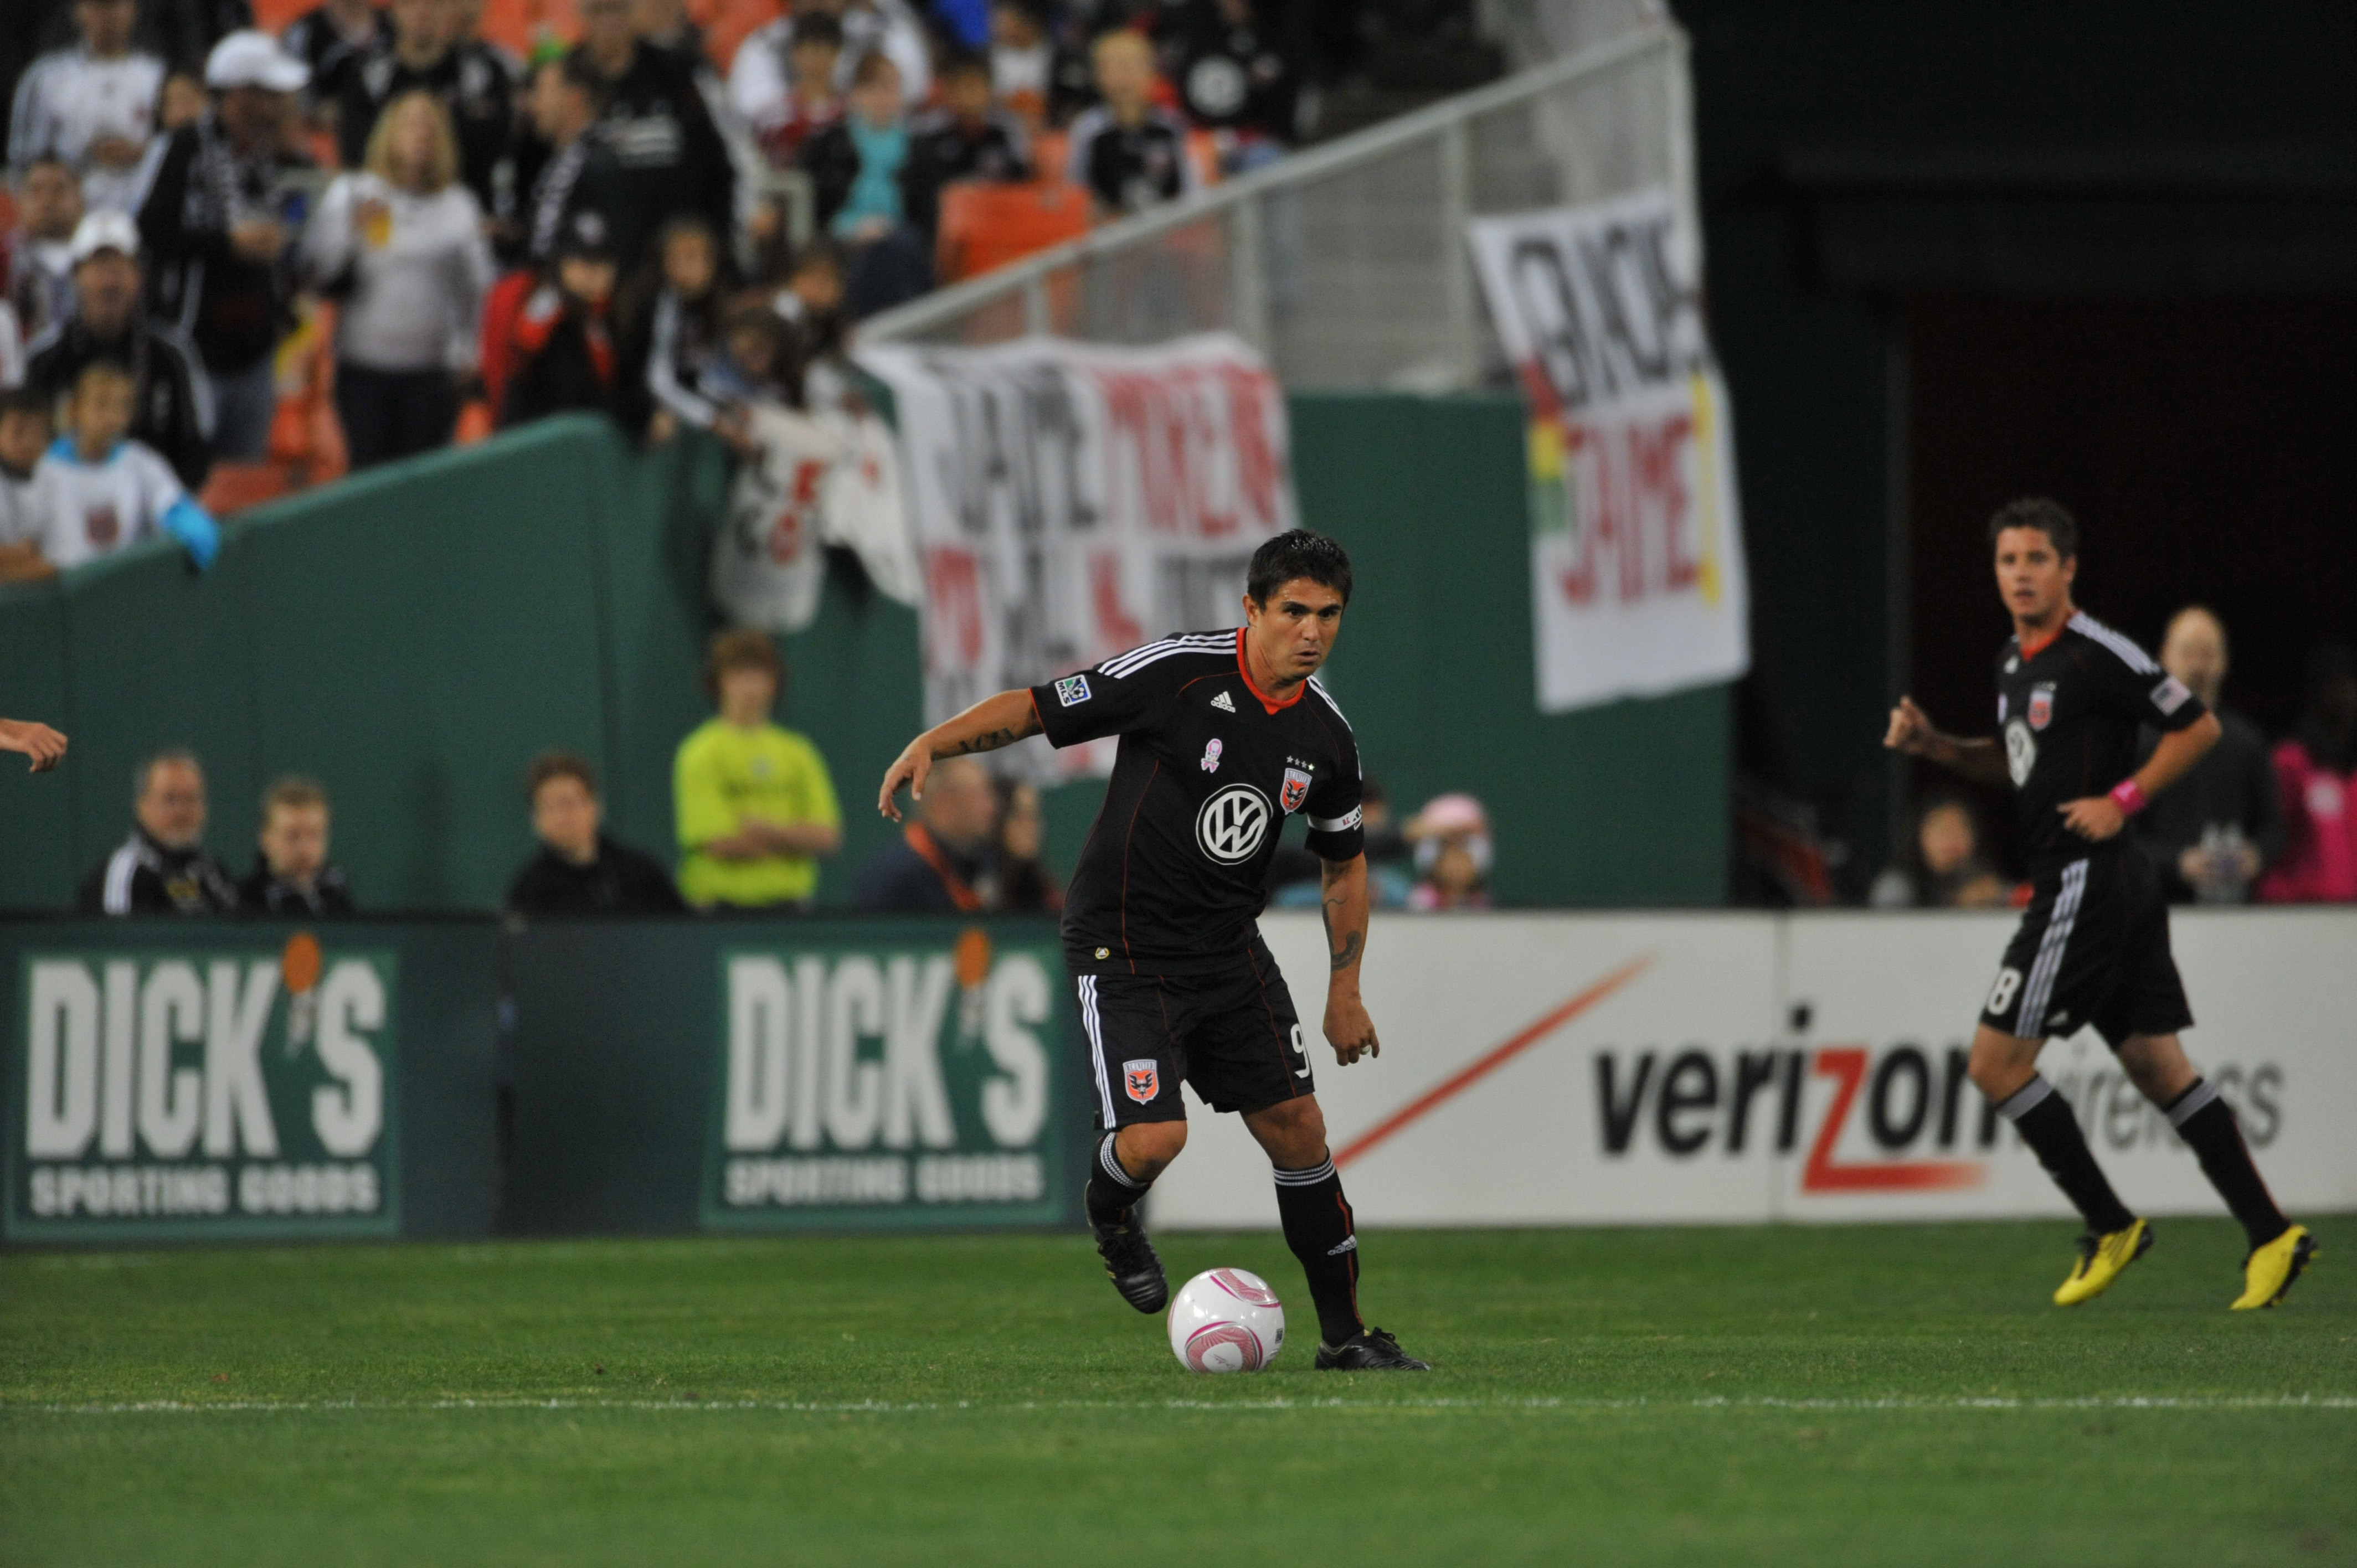 WASHINGTON, DC - OCTOBER 23:  Jaime Moreno #99 of D.C. United dribbles the ball during the game against Toronto FC at RFK Stadium on October 23, 2010 in Washington, DC. Toronto defeated DC 3-2. (Photo by Larry French/Getty Images)